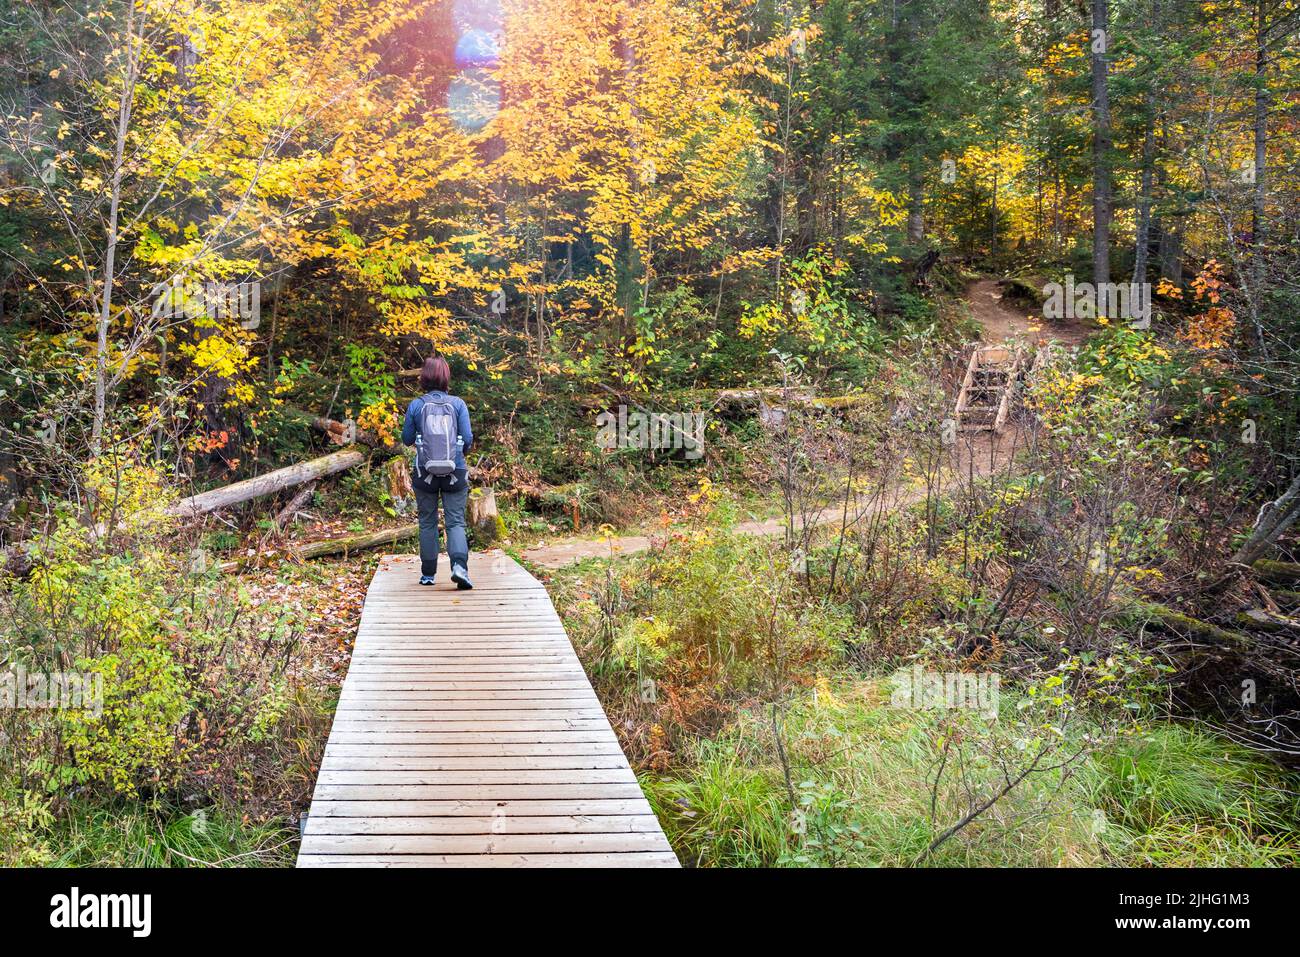 Woman hiker on a wooden walkway over wetland along a forest trail in a park on a sunny autumn day. Lens flare. Algonquin Park, ON, Canada. Stock Photo